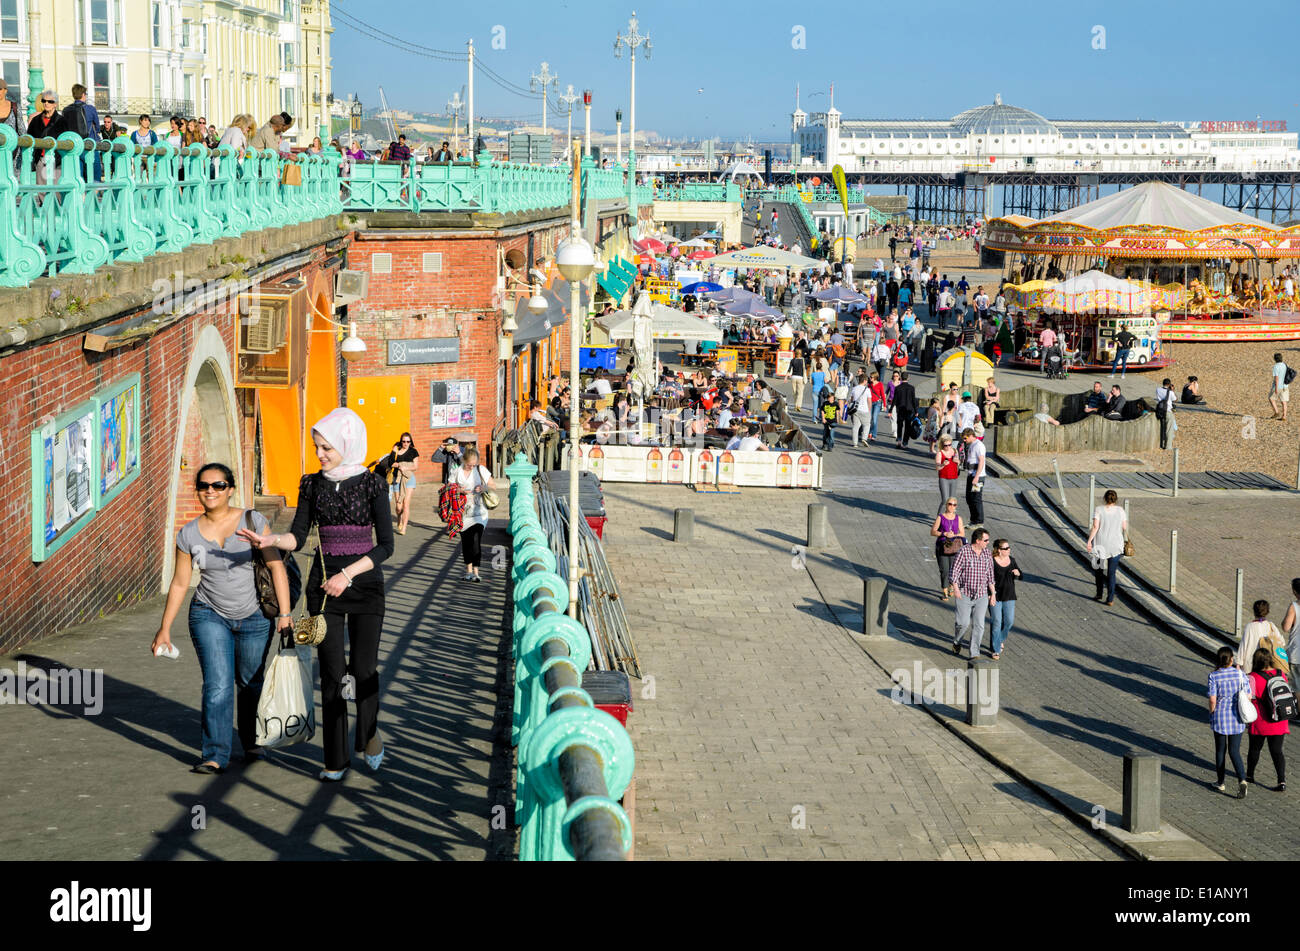 English seaside resort town on a warm summer day, with crowds of people on the promenade. Brighton sea front; summer; promenade; Stock Photo